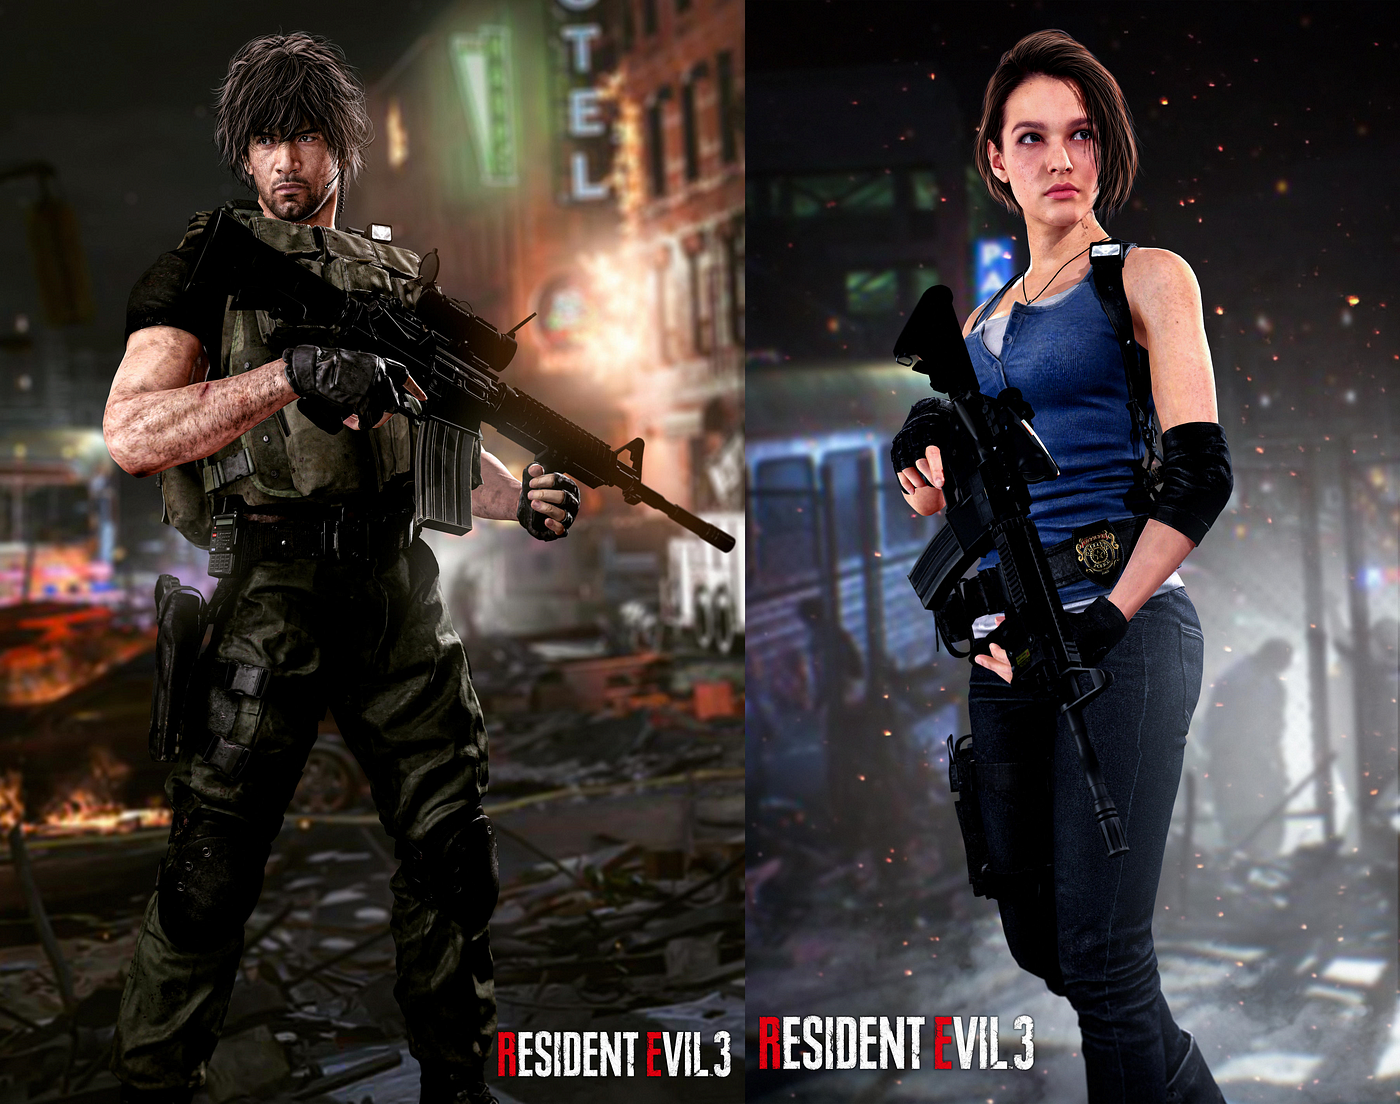 What Characters Are In Resident Evil 3 Remake?